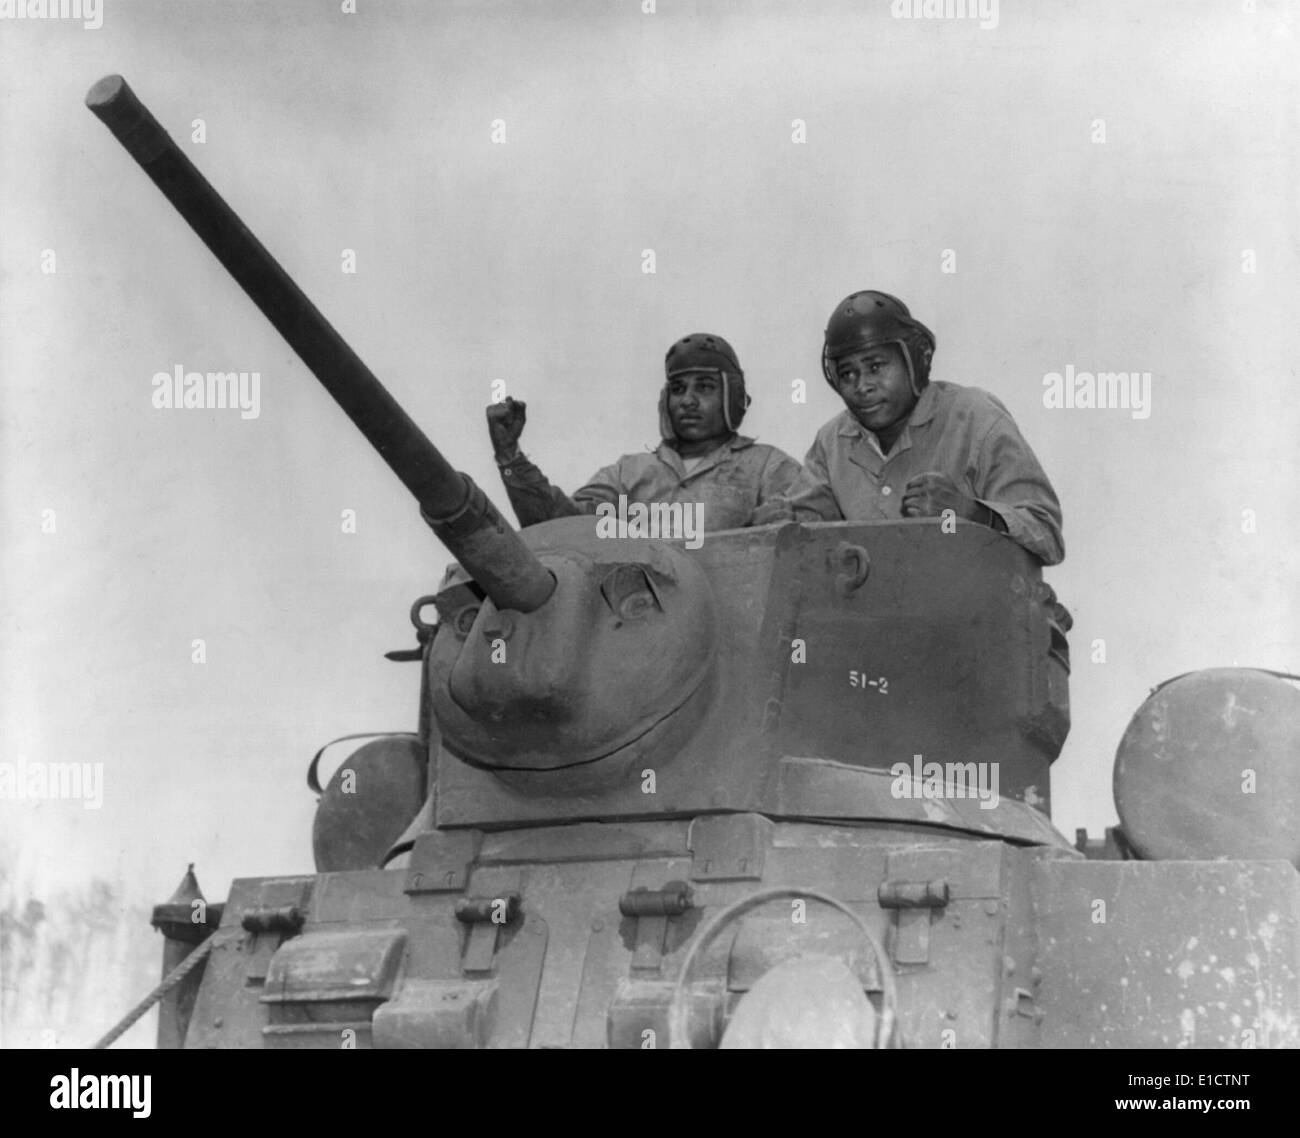 First world war tank Black and White Stock Photos & Images - Alamy